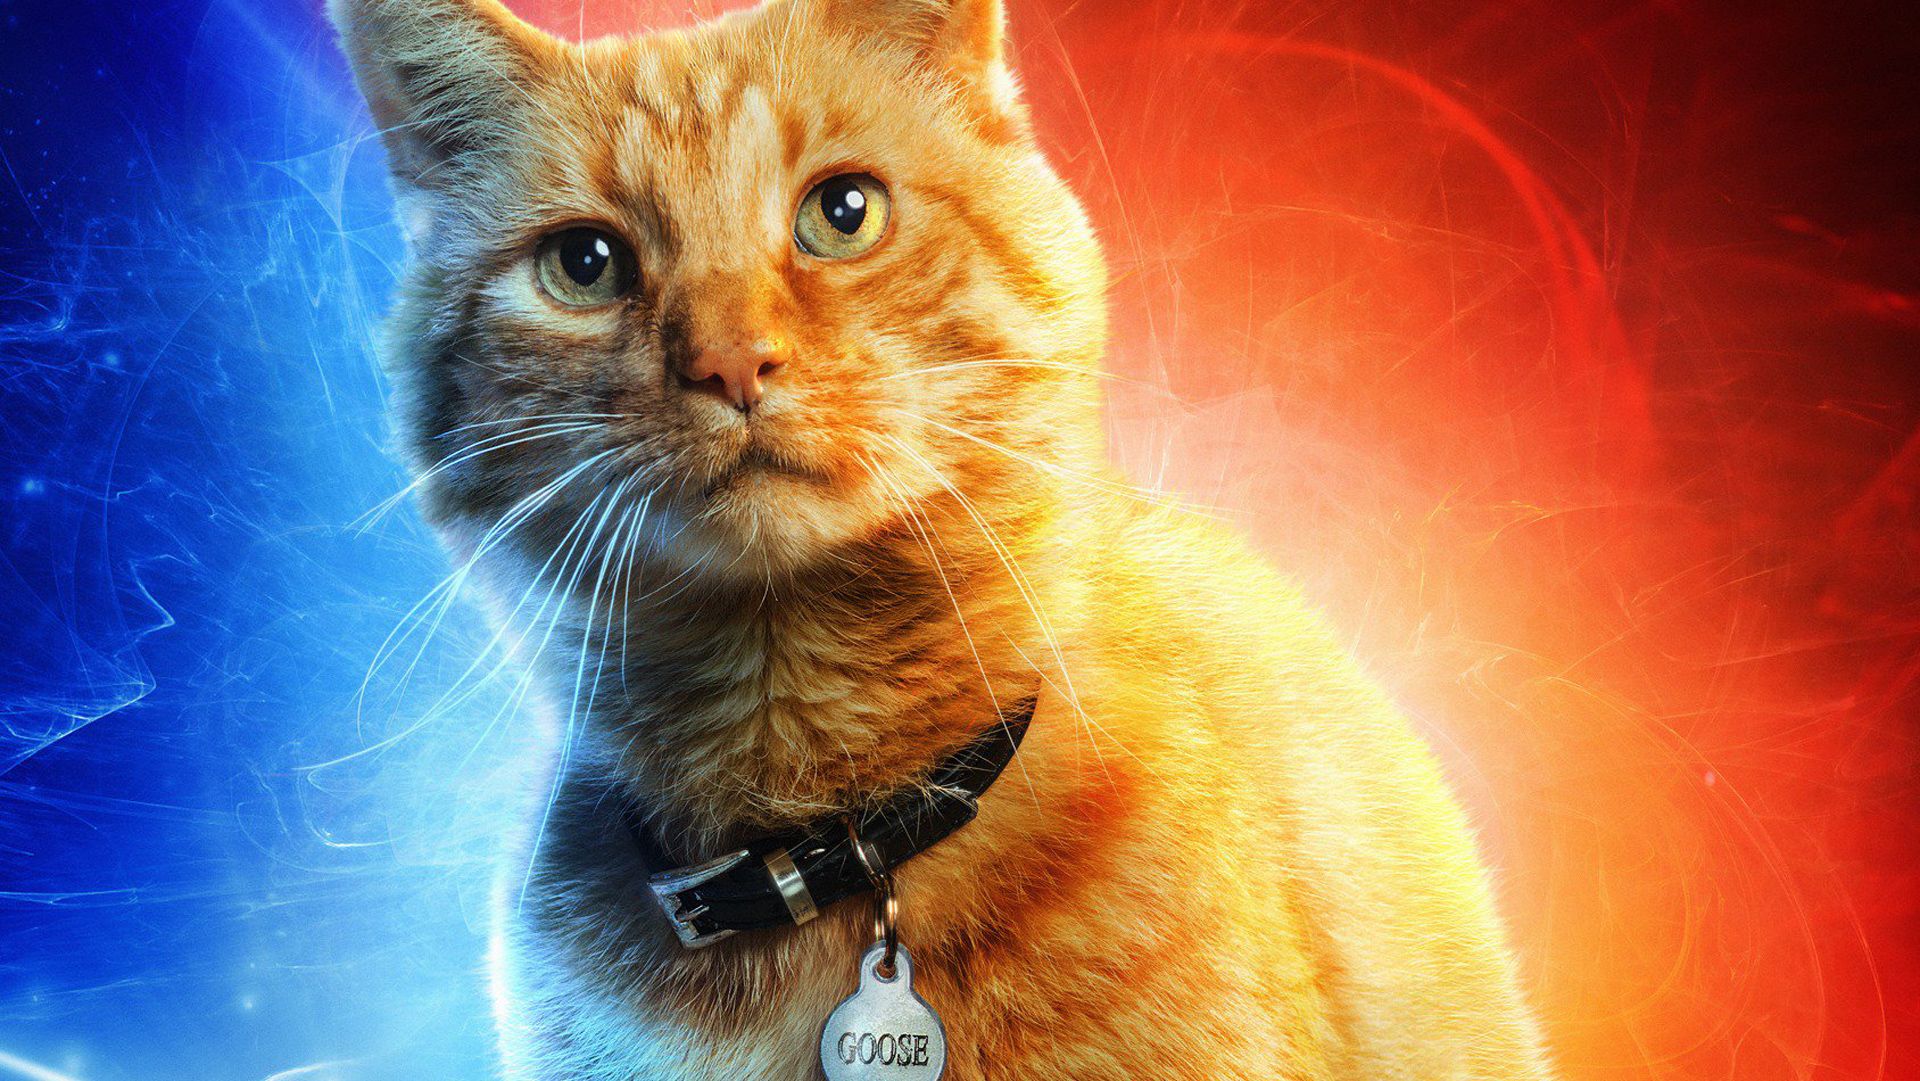 Goose The Cat In Captain Marvel, HD Movies, 4k Wallpaper, Image, Background, Photo and Picture